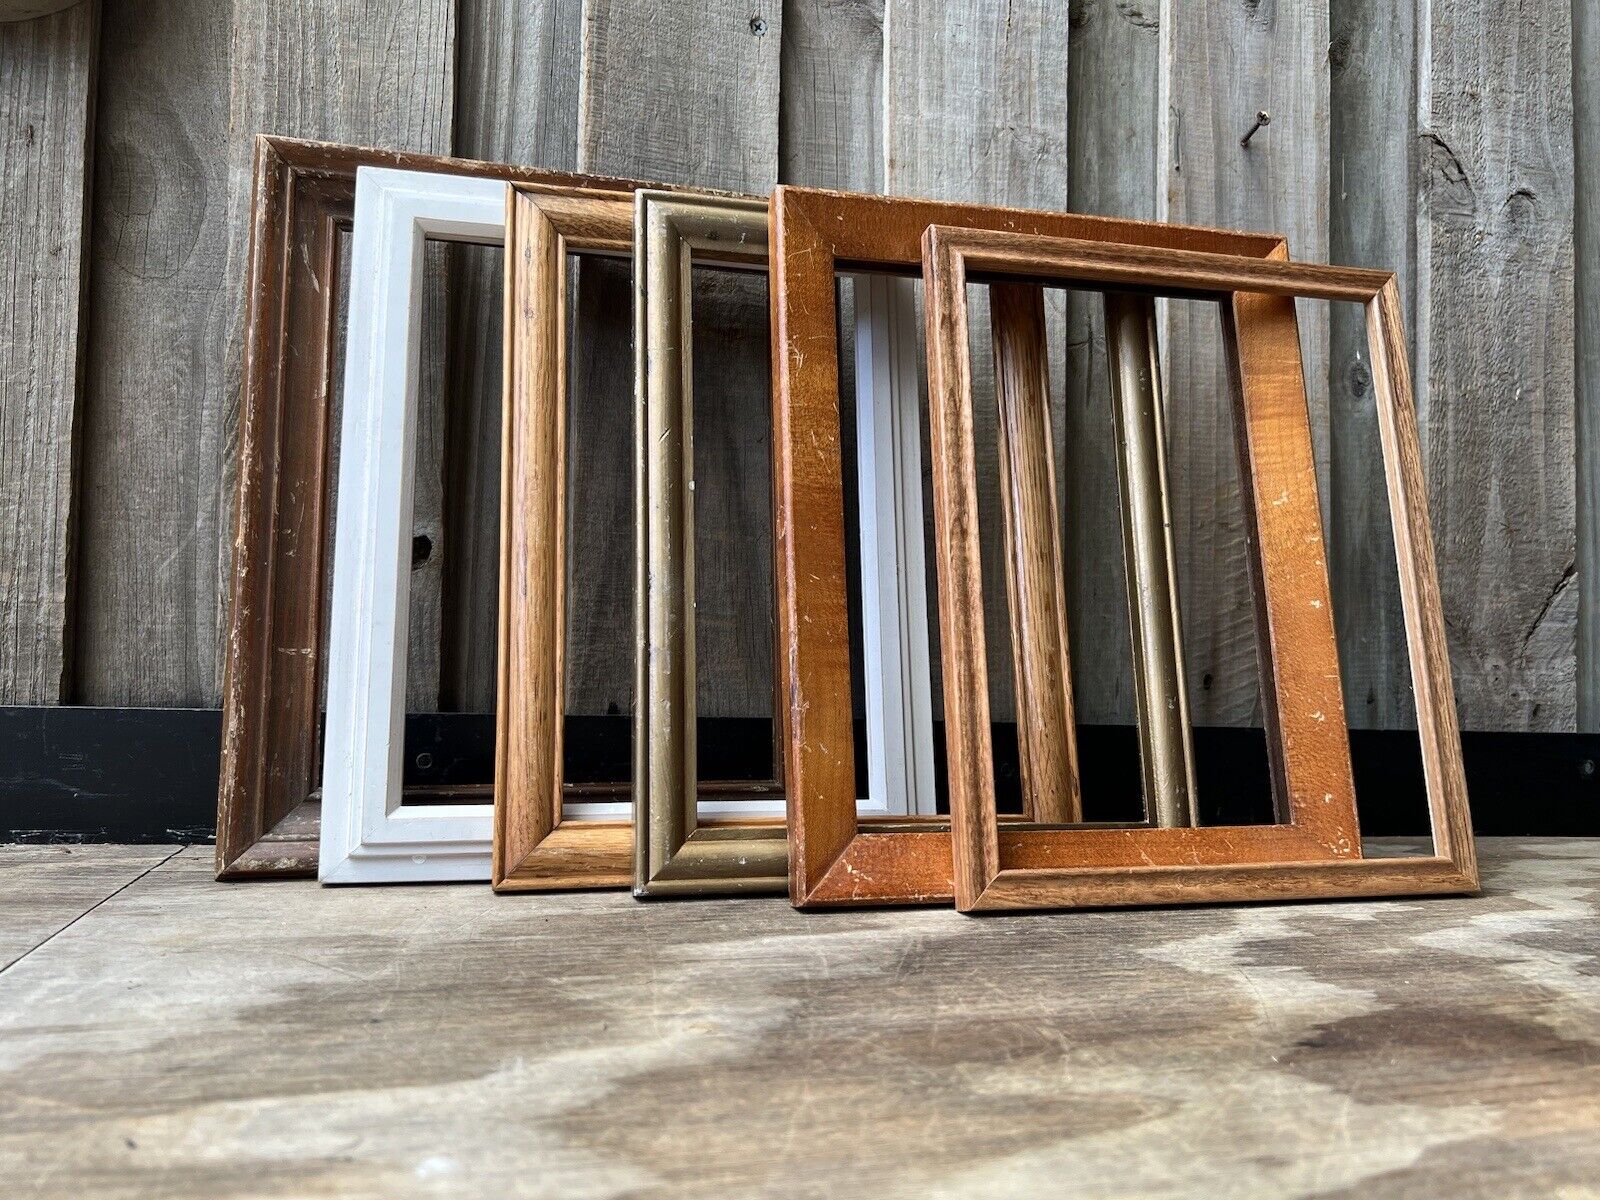 SPECIALIST Vintage Wood Picture Frames 8x10 Wall Gallery Shabby Chic Cottage